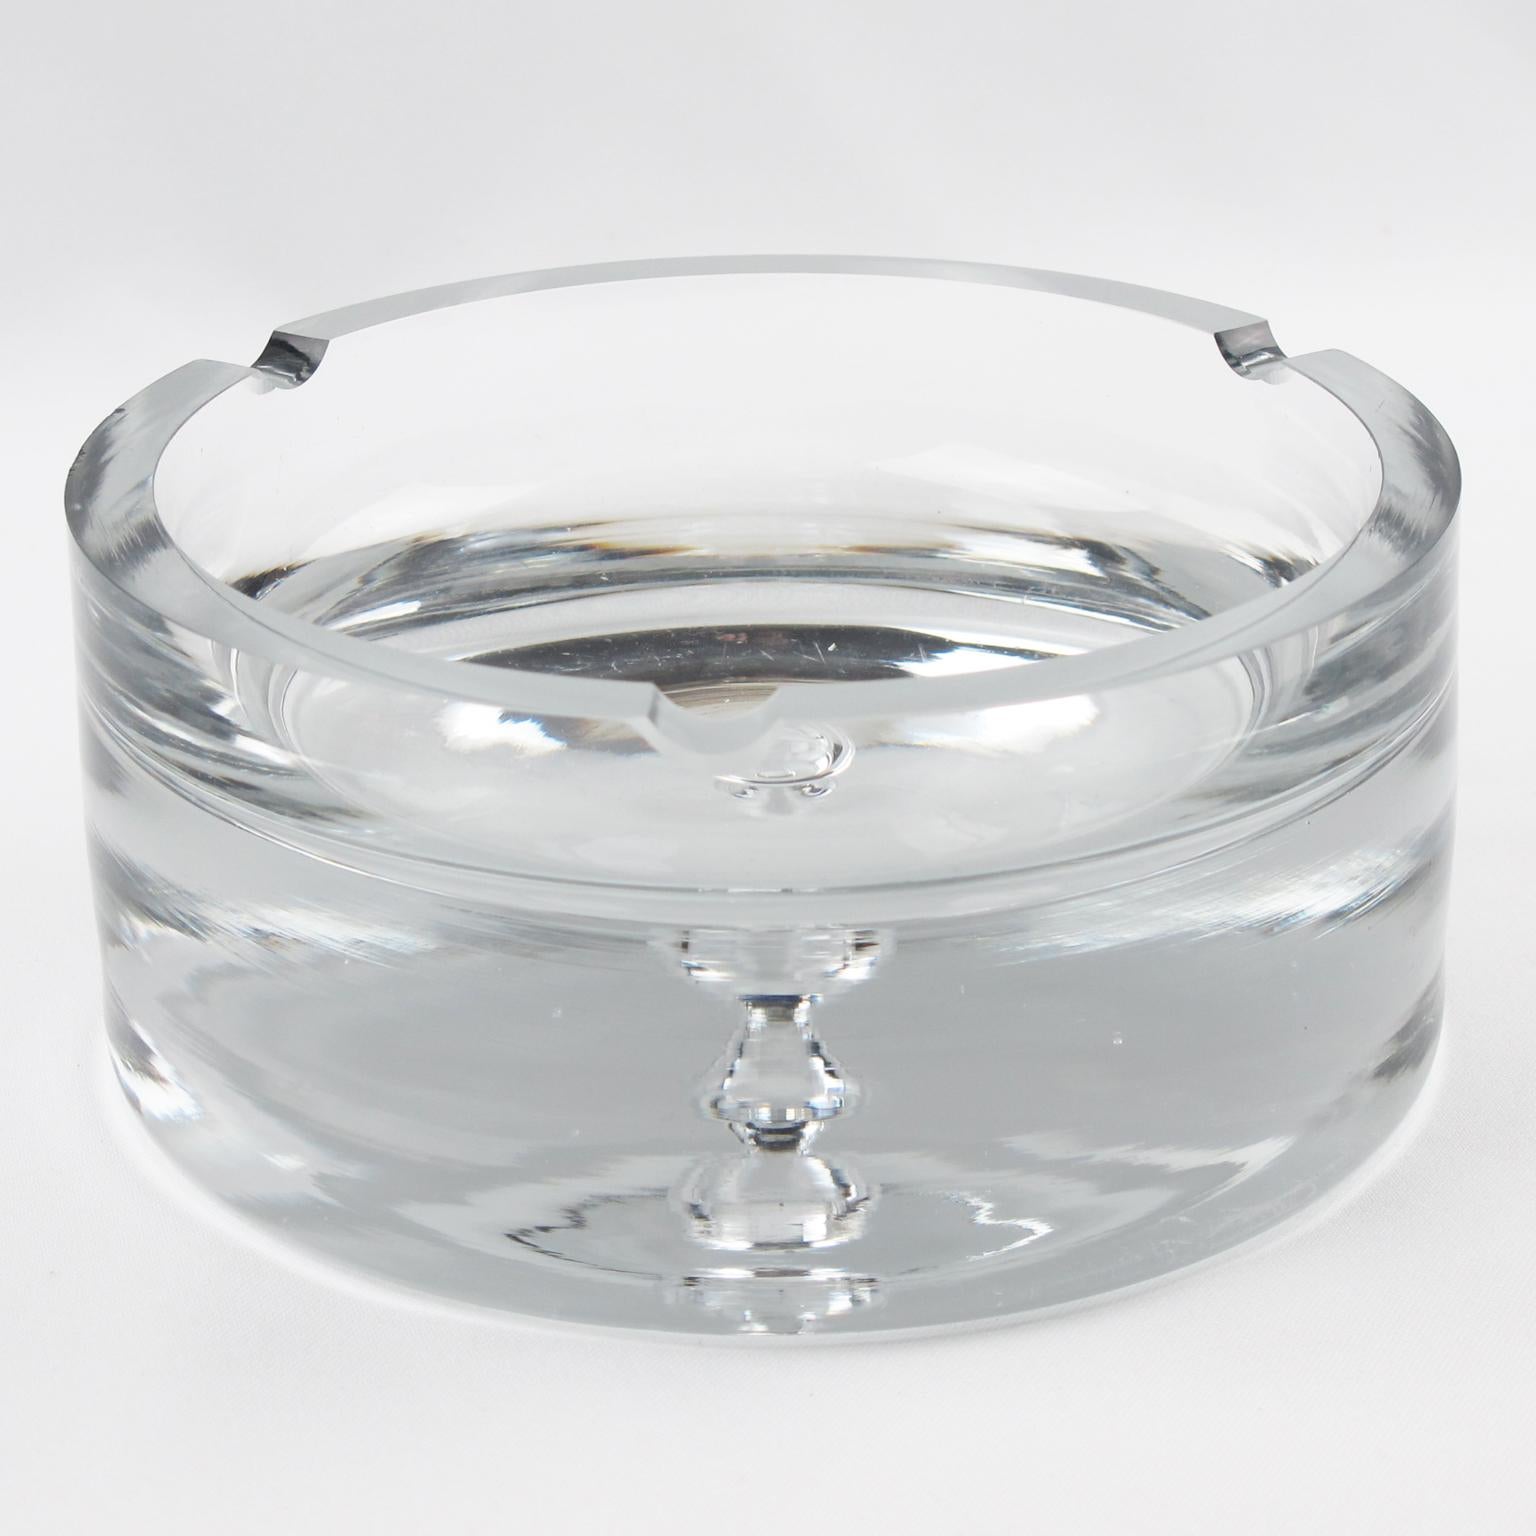 Stunning large midcentury modernist glass cigar ashtray or desk tidy or vide poche. Extra thick handmade crystal clear glass, rounded shape with blown bubble insert in the middle.
Measurements: 6.32 in. diameter (16 cm) x 2.94 in. high (7.5 cm).